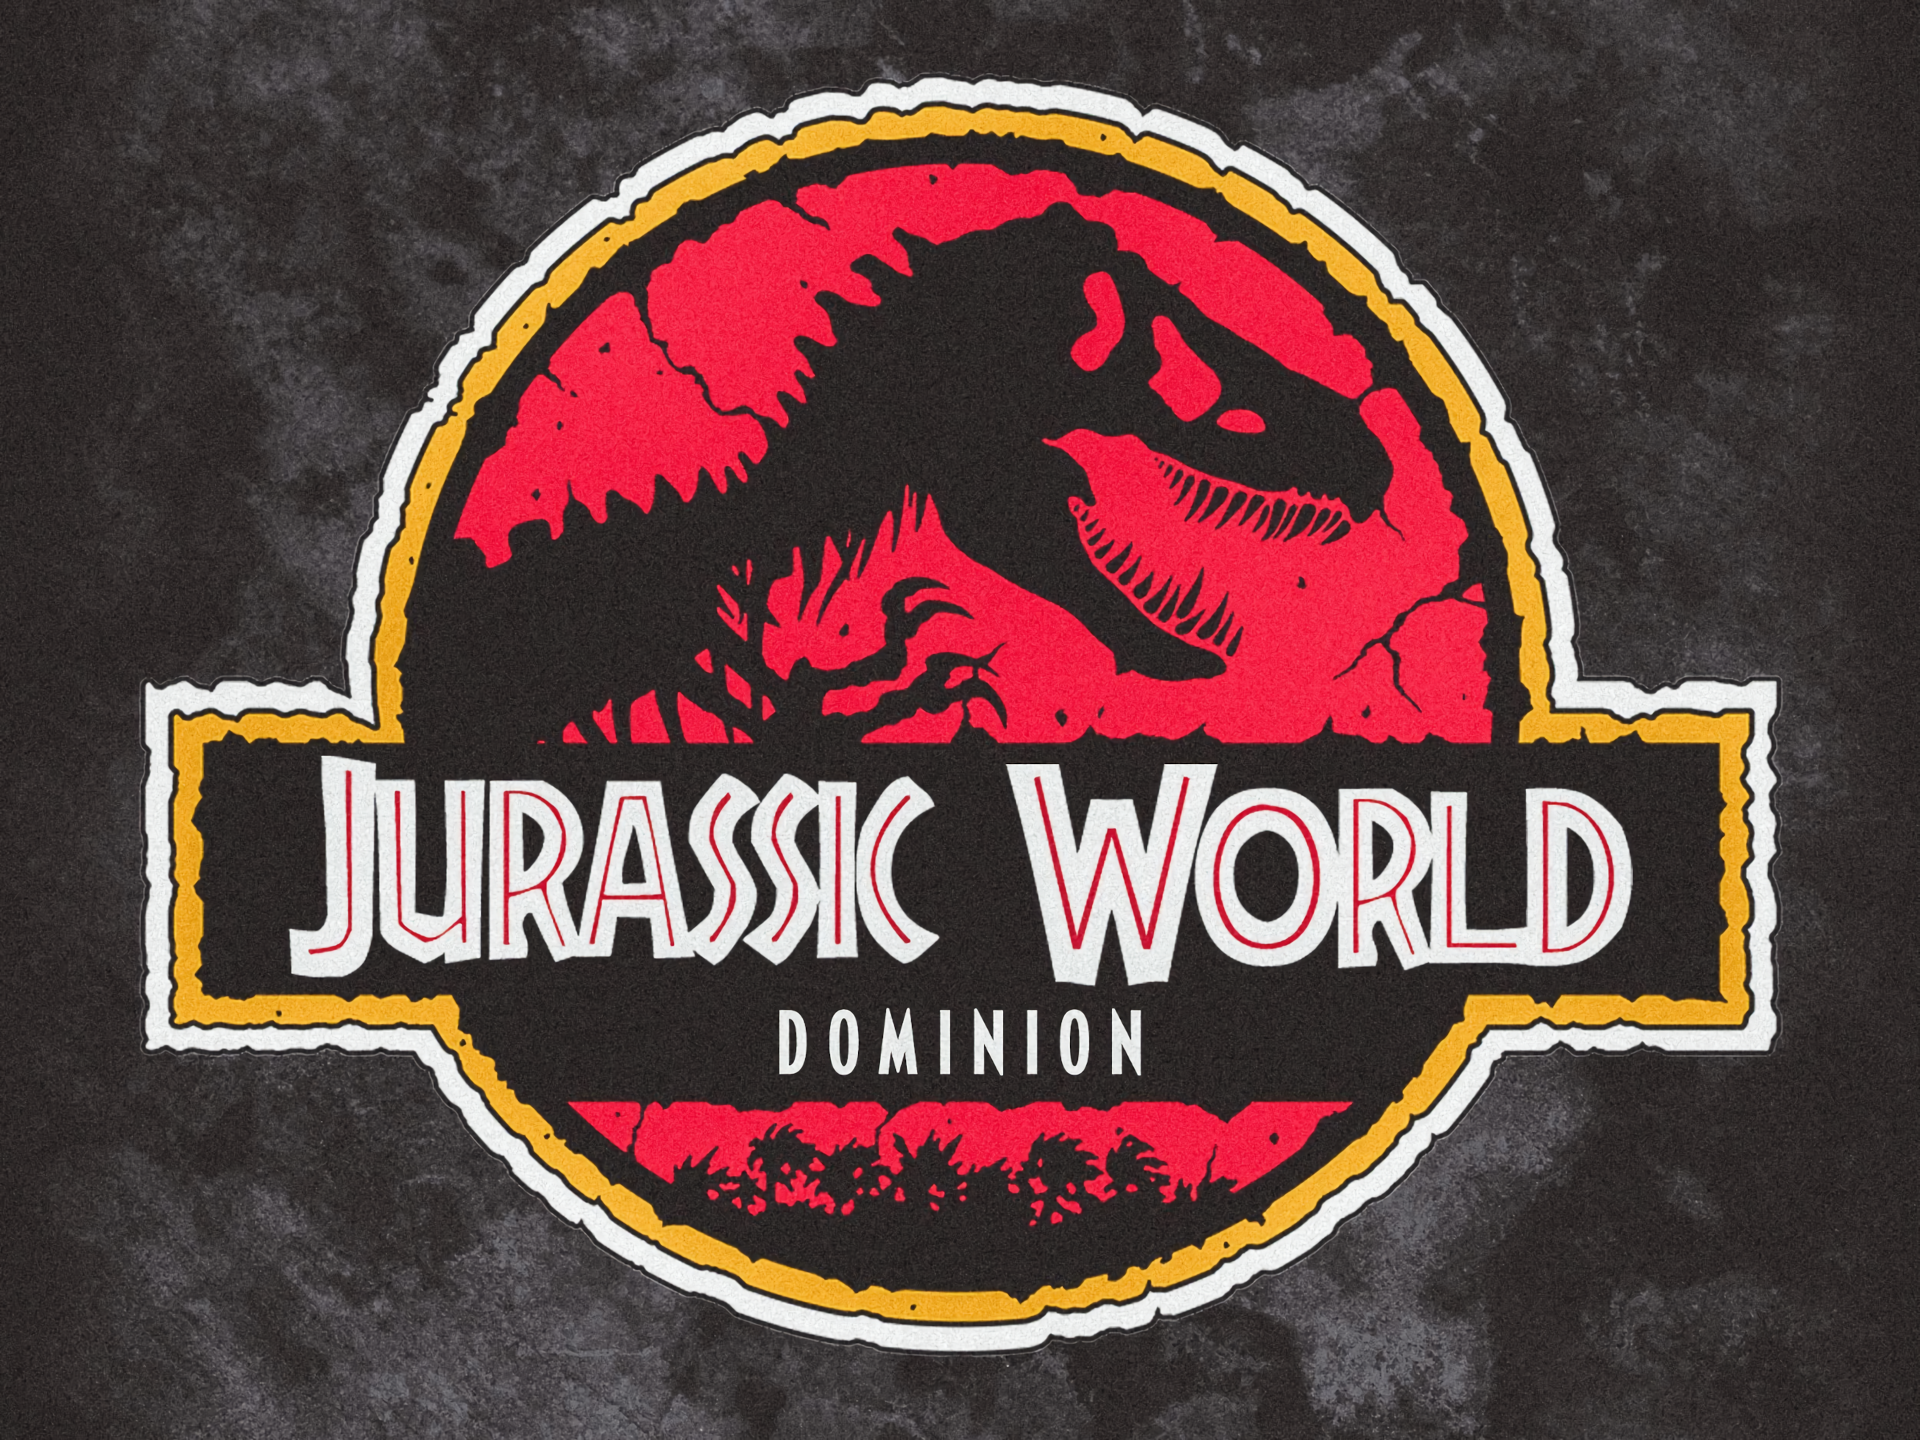 Jurassic World Dominion: Same Dinosaurs, Different Cars? Car Marketplace for Used & New Cars. Online Car Marketplace for Used & New Cars